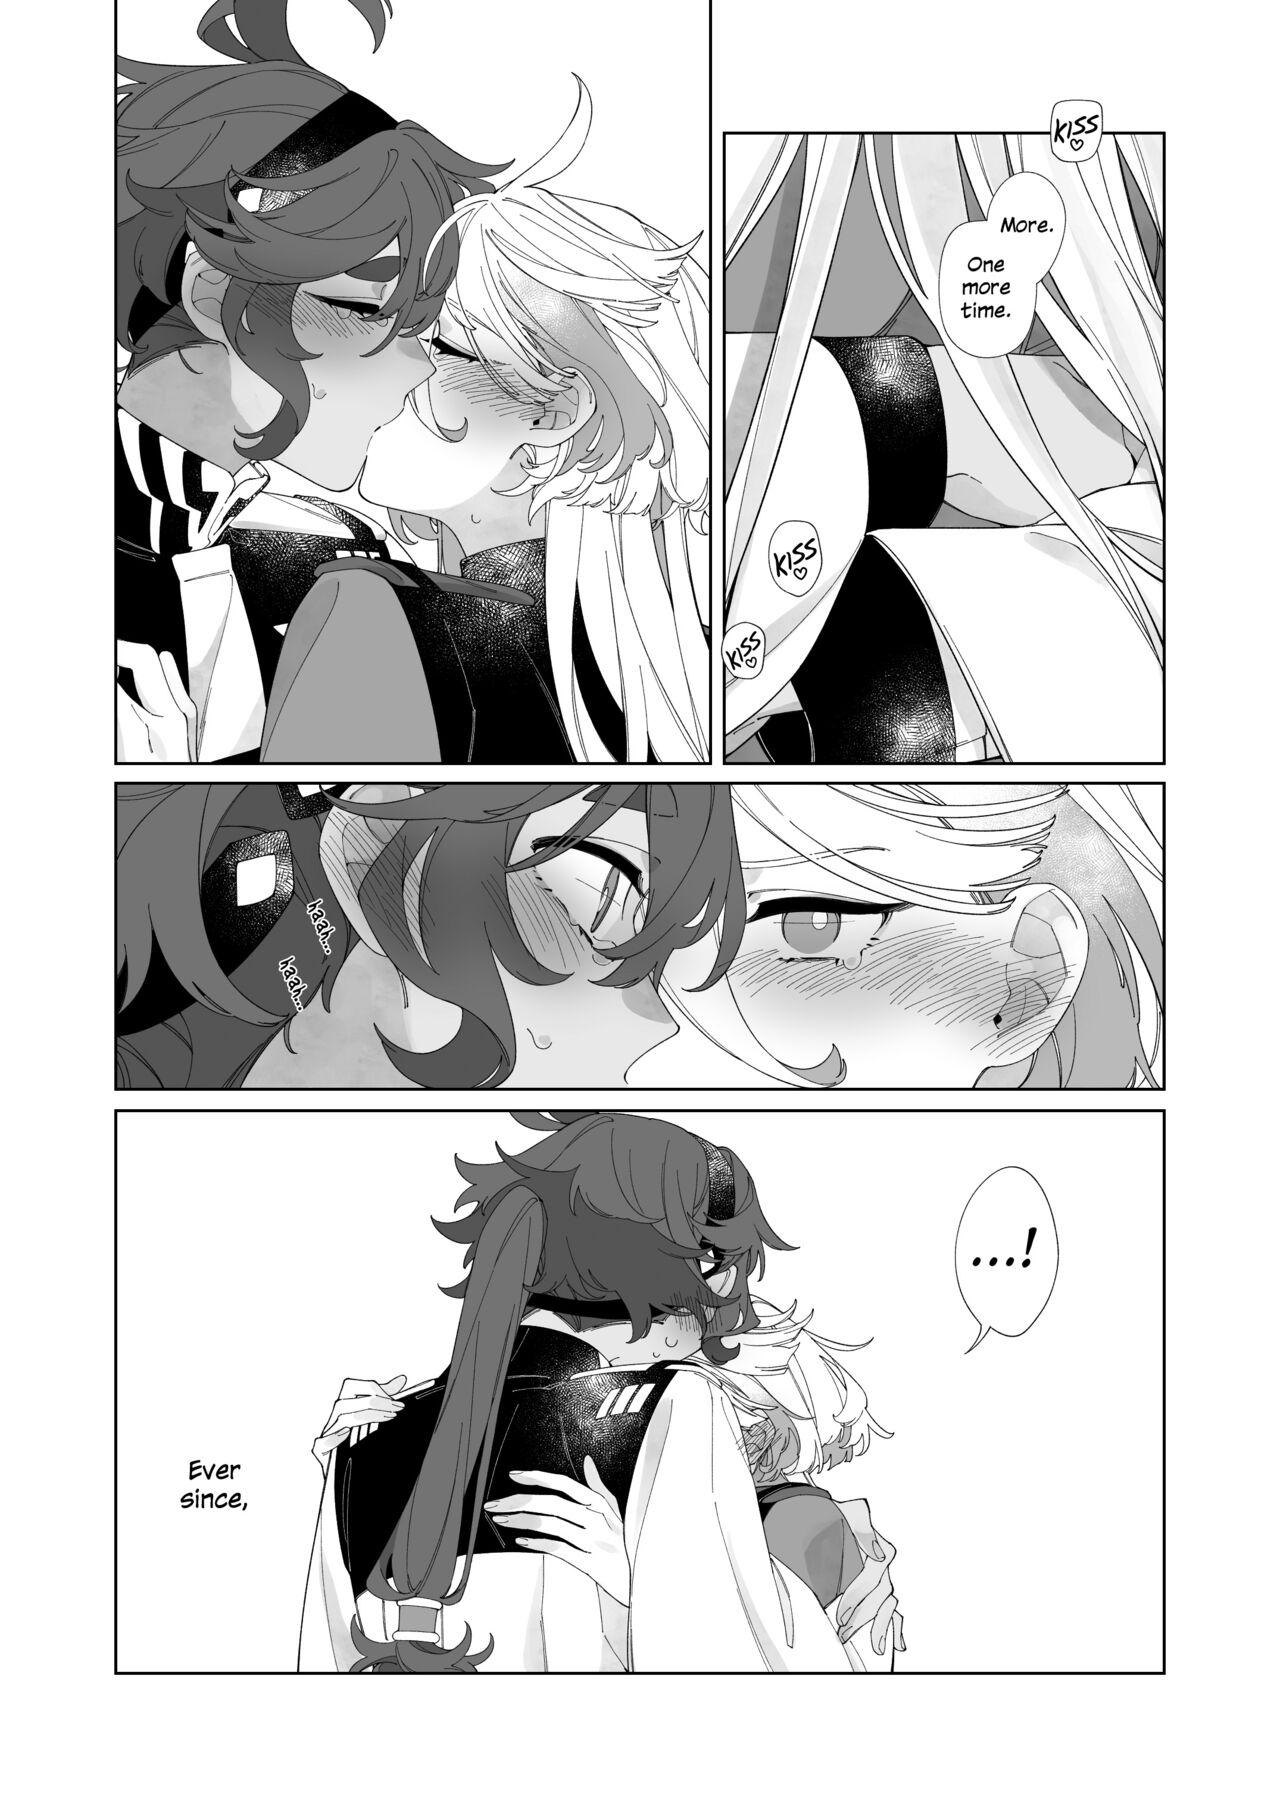 Hardcore Gay Kiss no Ato Nani ga Shitai? | After Kissing, What Else Do You Want to Do? - Mobile suit gundam the witch from mercury HD - Page 7